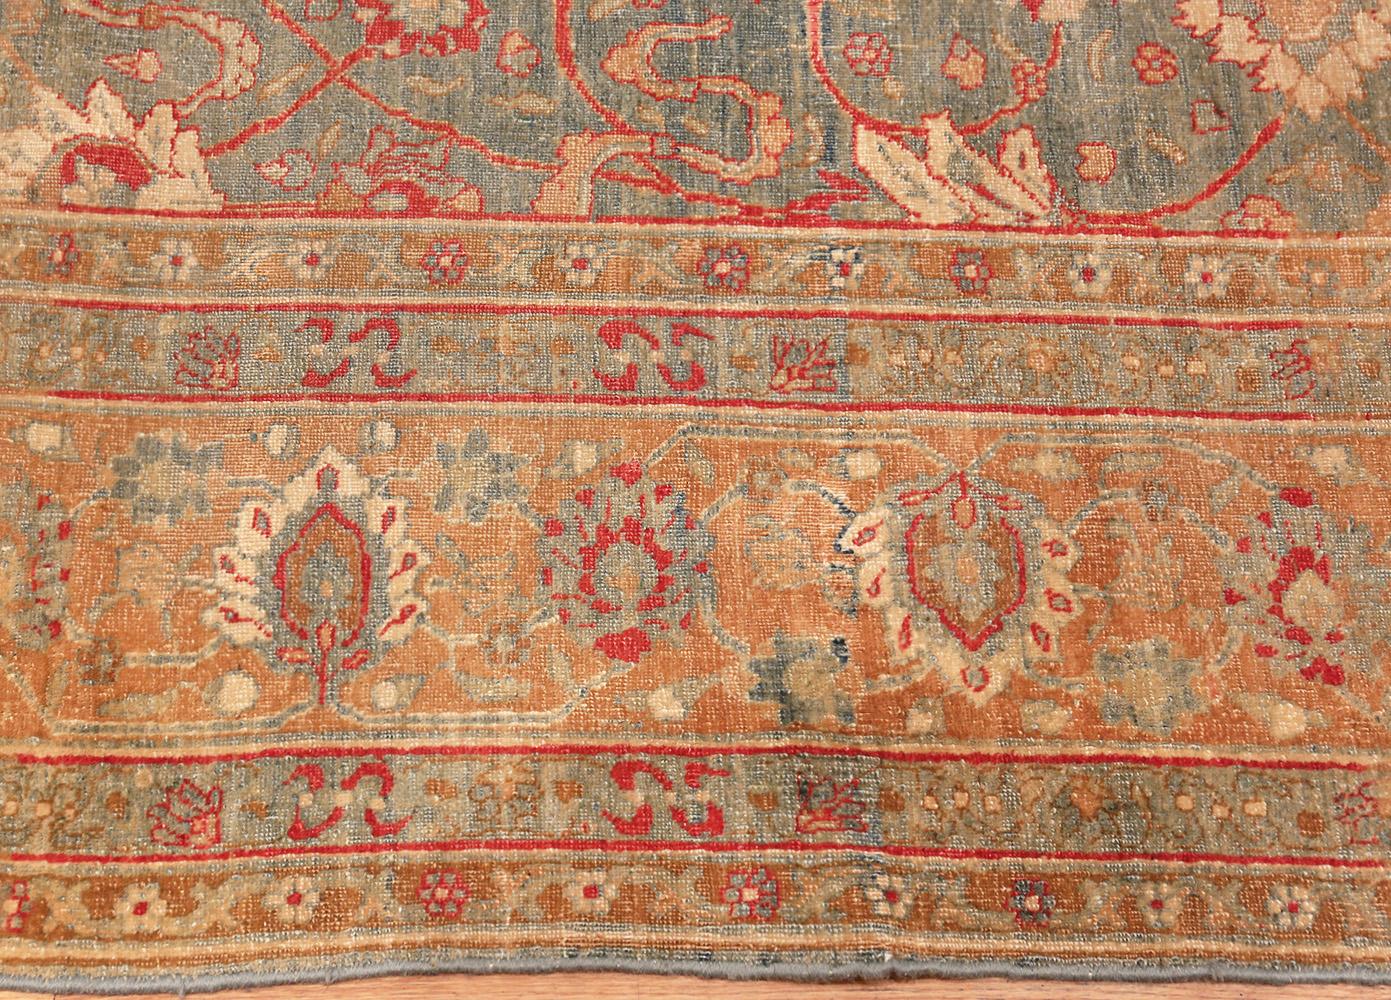 A magnificently sophisticated antique sky blue color background Persian Tabriz rug, country of origin / Rug type: Antique Persian rugs, circa 1910.